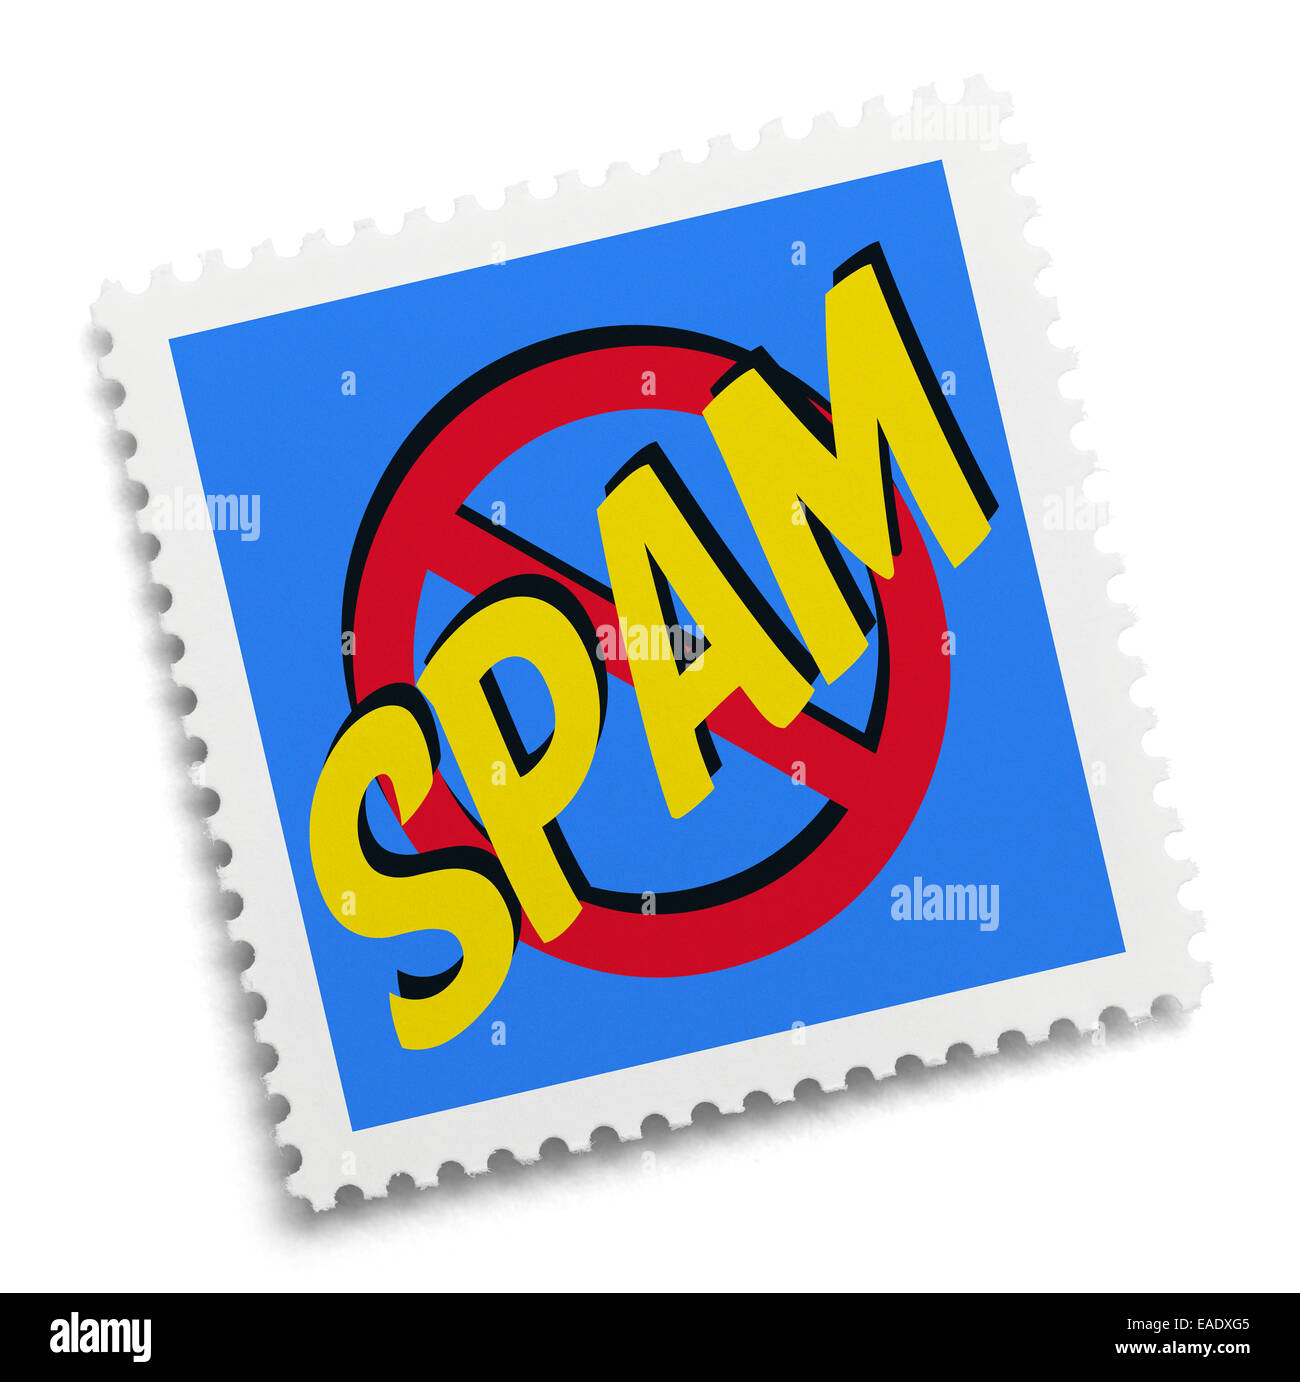 No Spam Email Stamp Isolated on White Background. Stock Photo